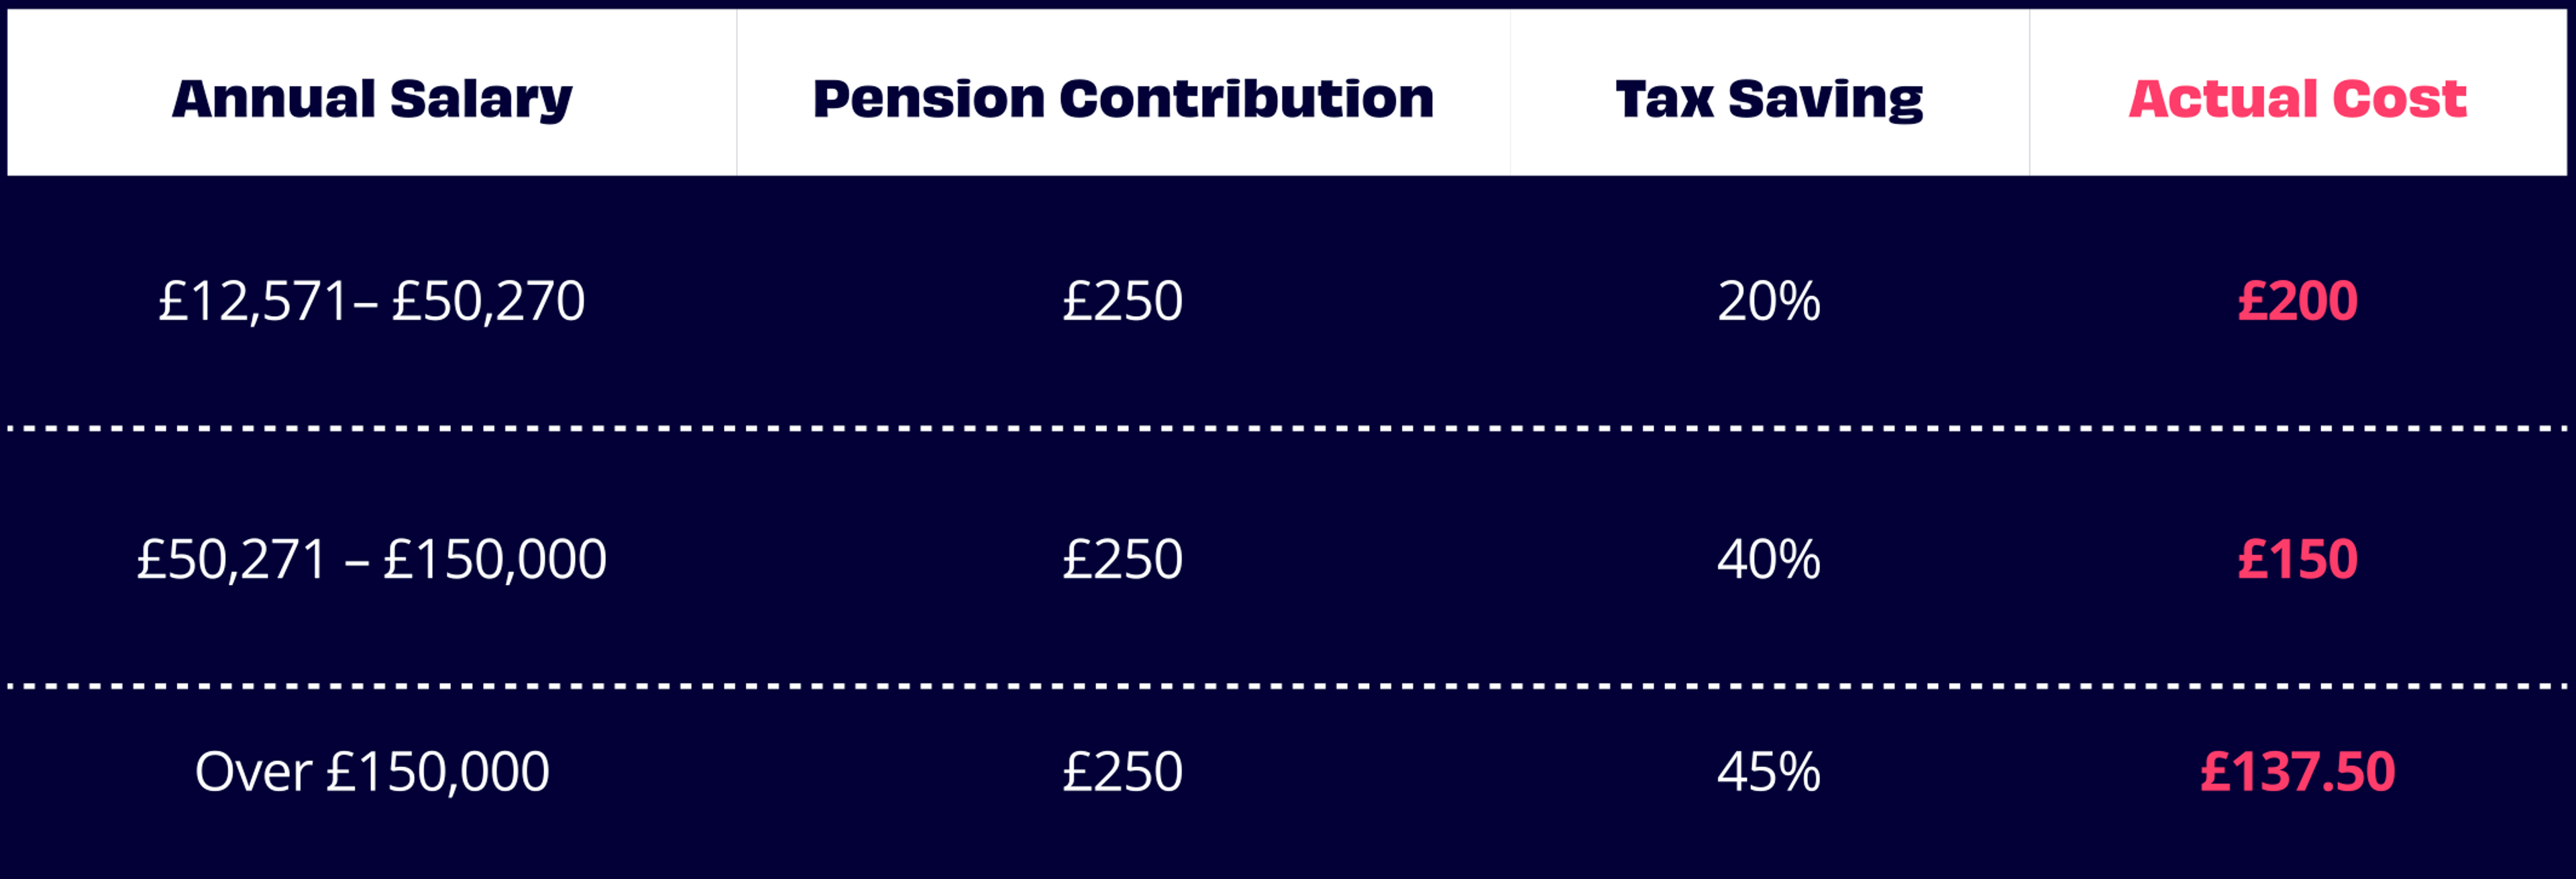 Table showing tax saving when using net pay pension contributions